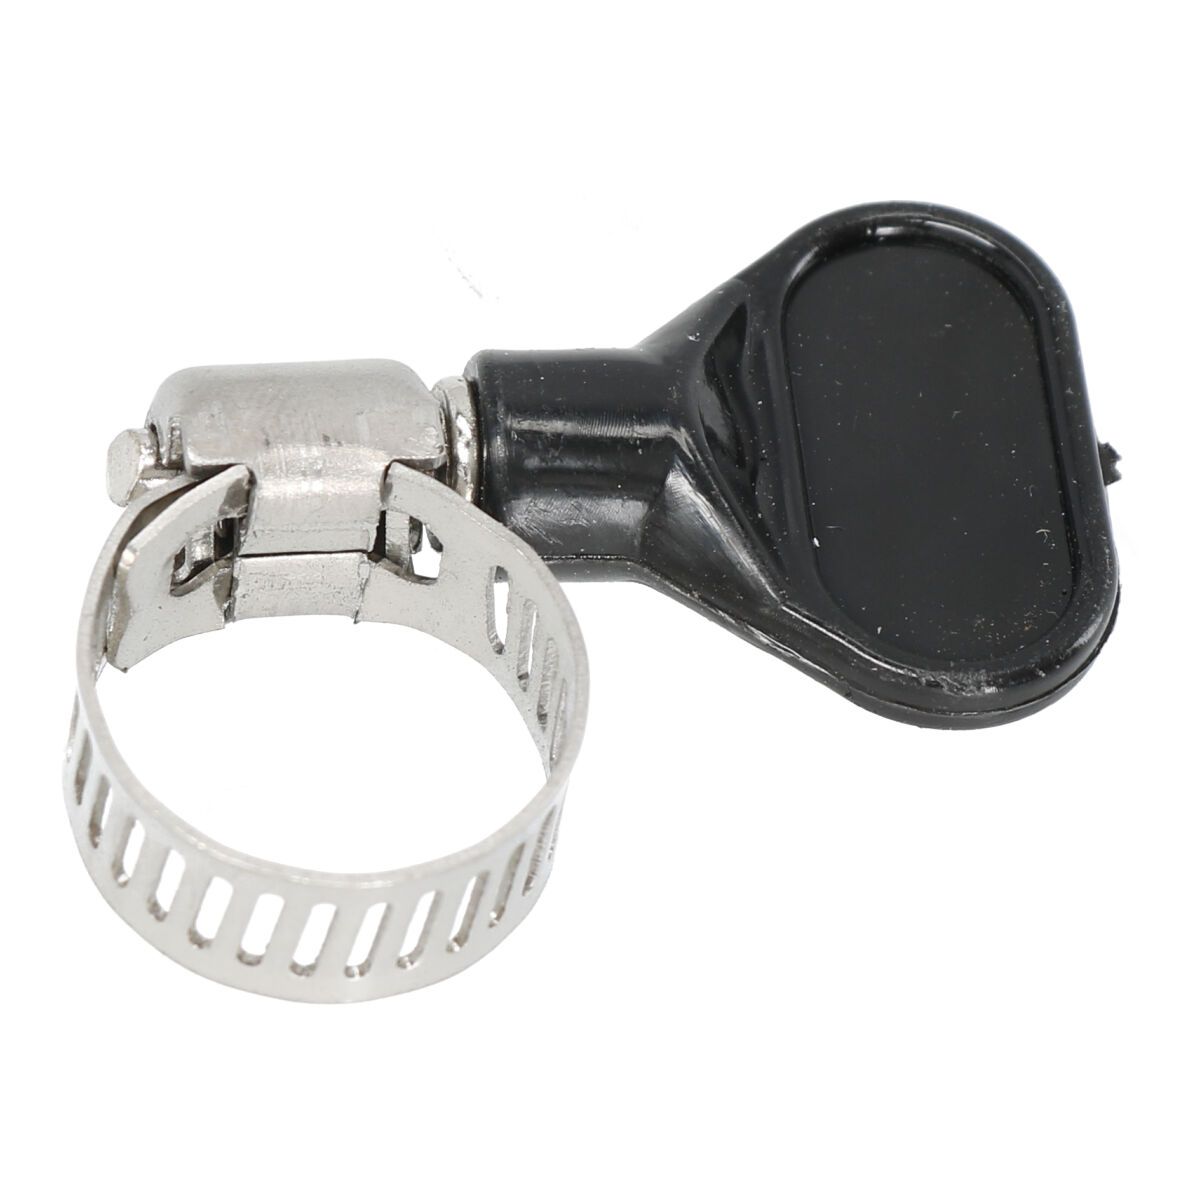 Hose clamp stainless steel with wing screw 10-16 mm 5 Pcs.